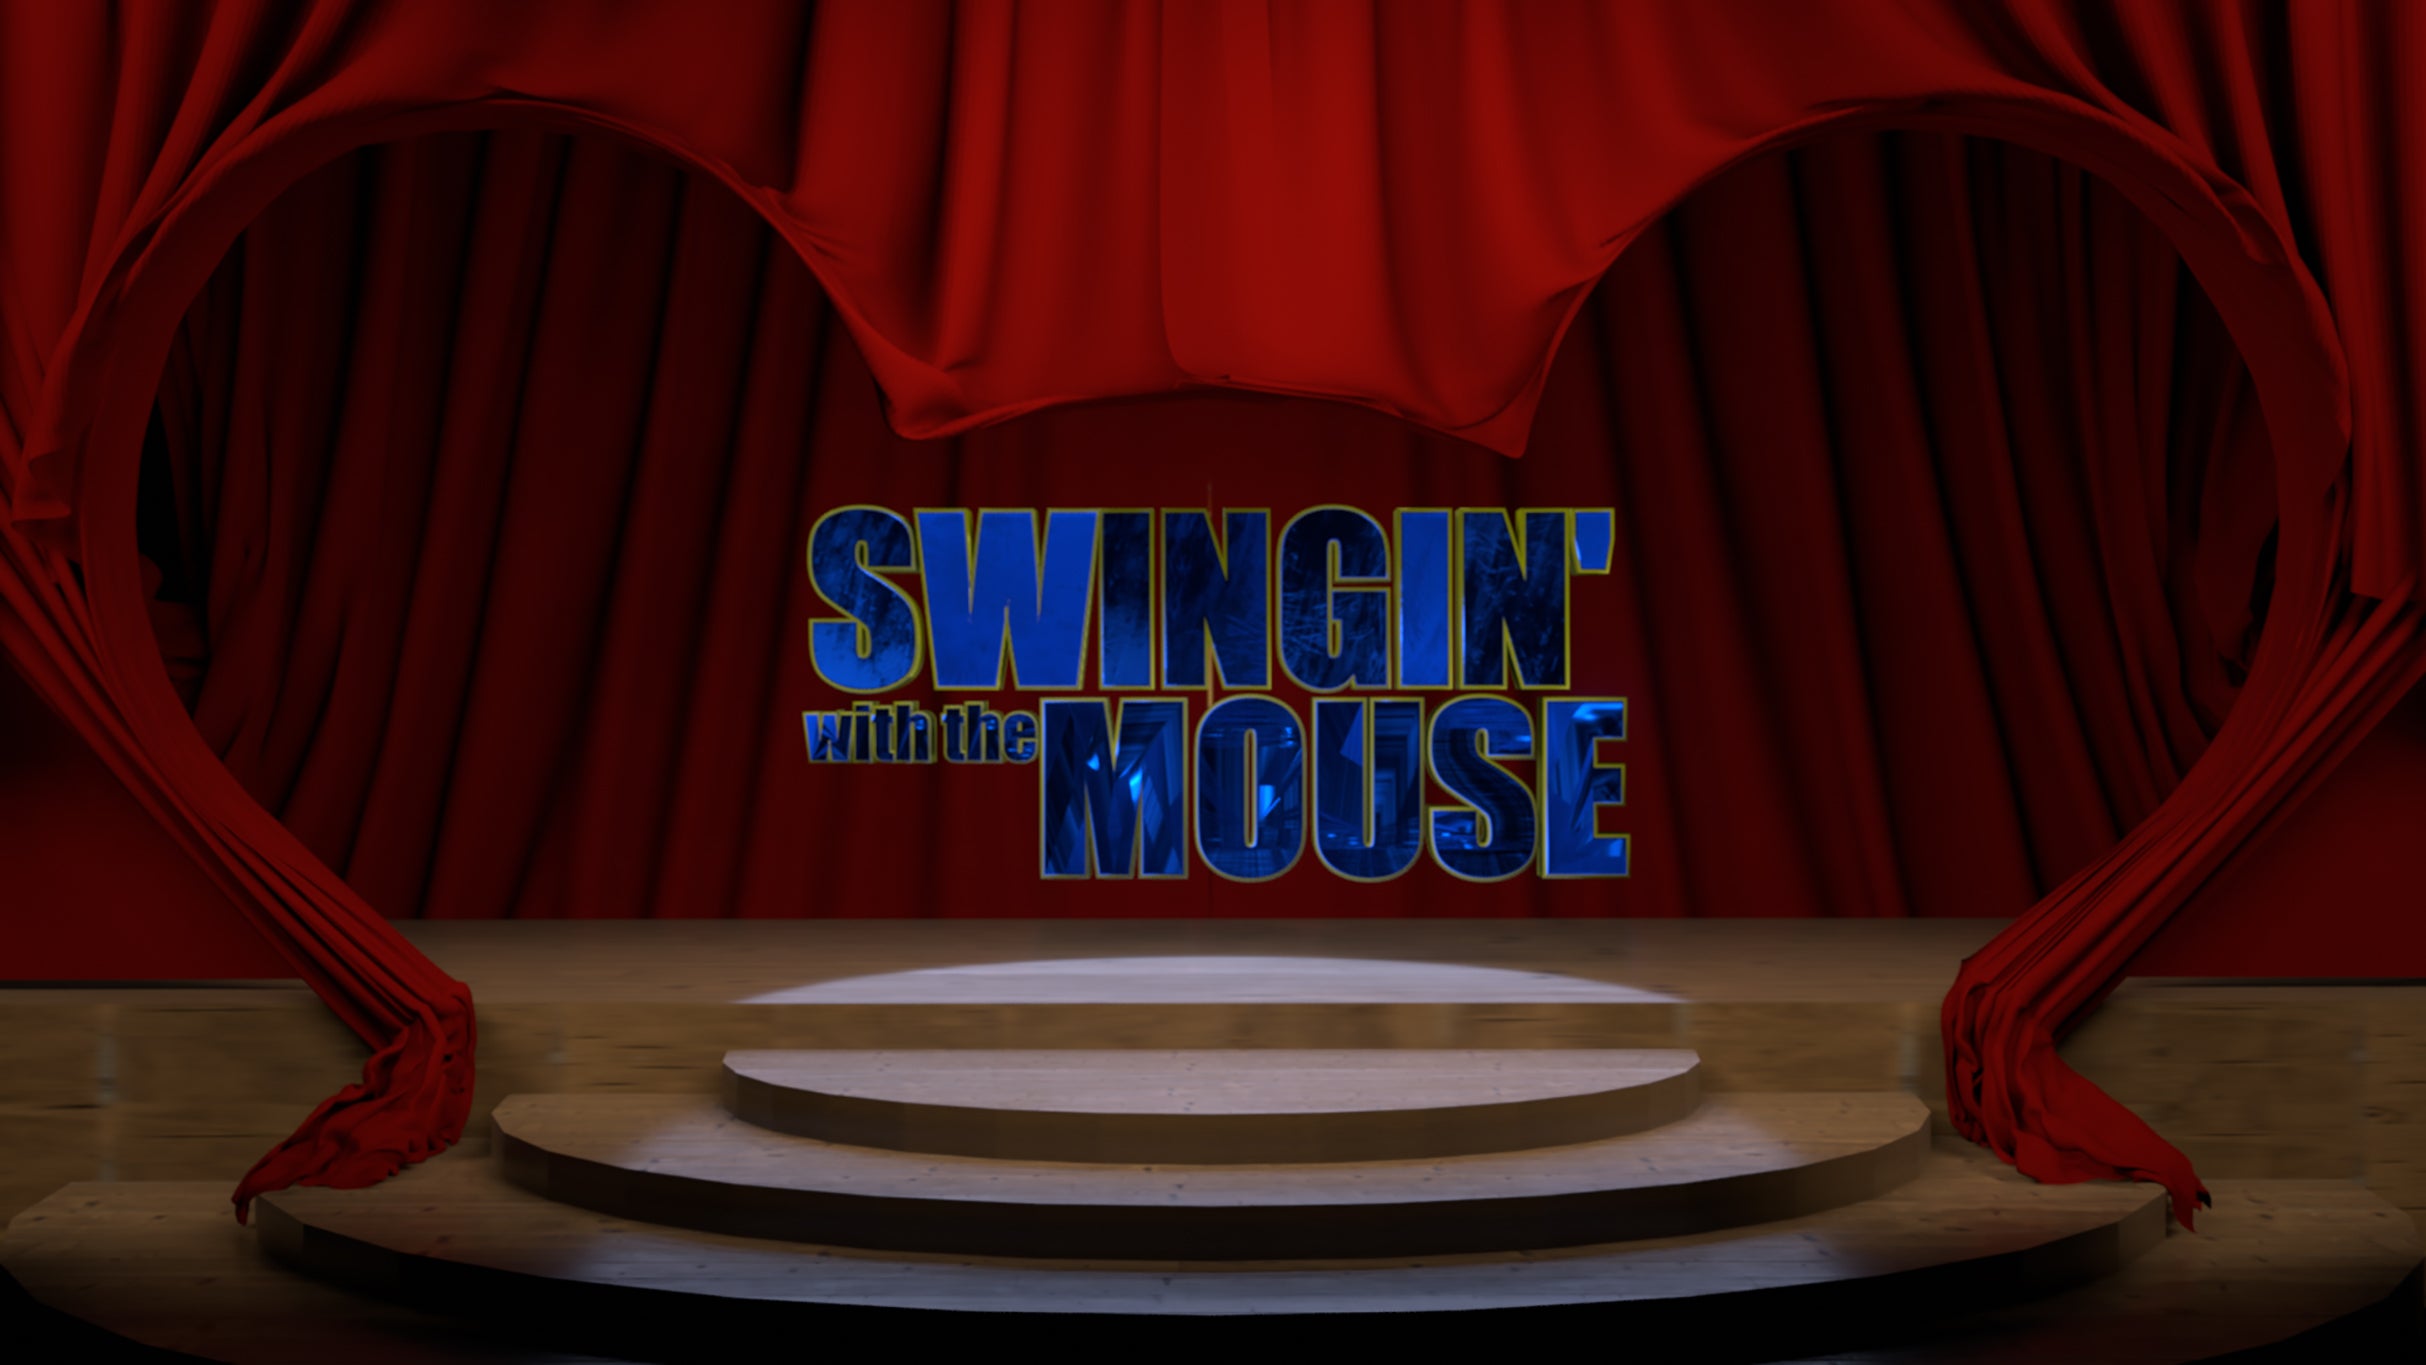 BroadWest Entertainment presents Swingin' With The Mouse